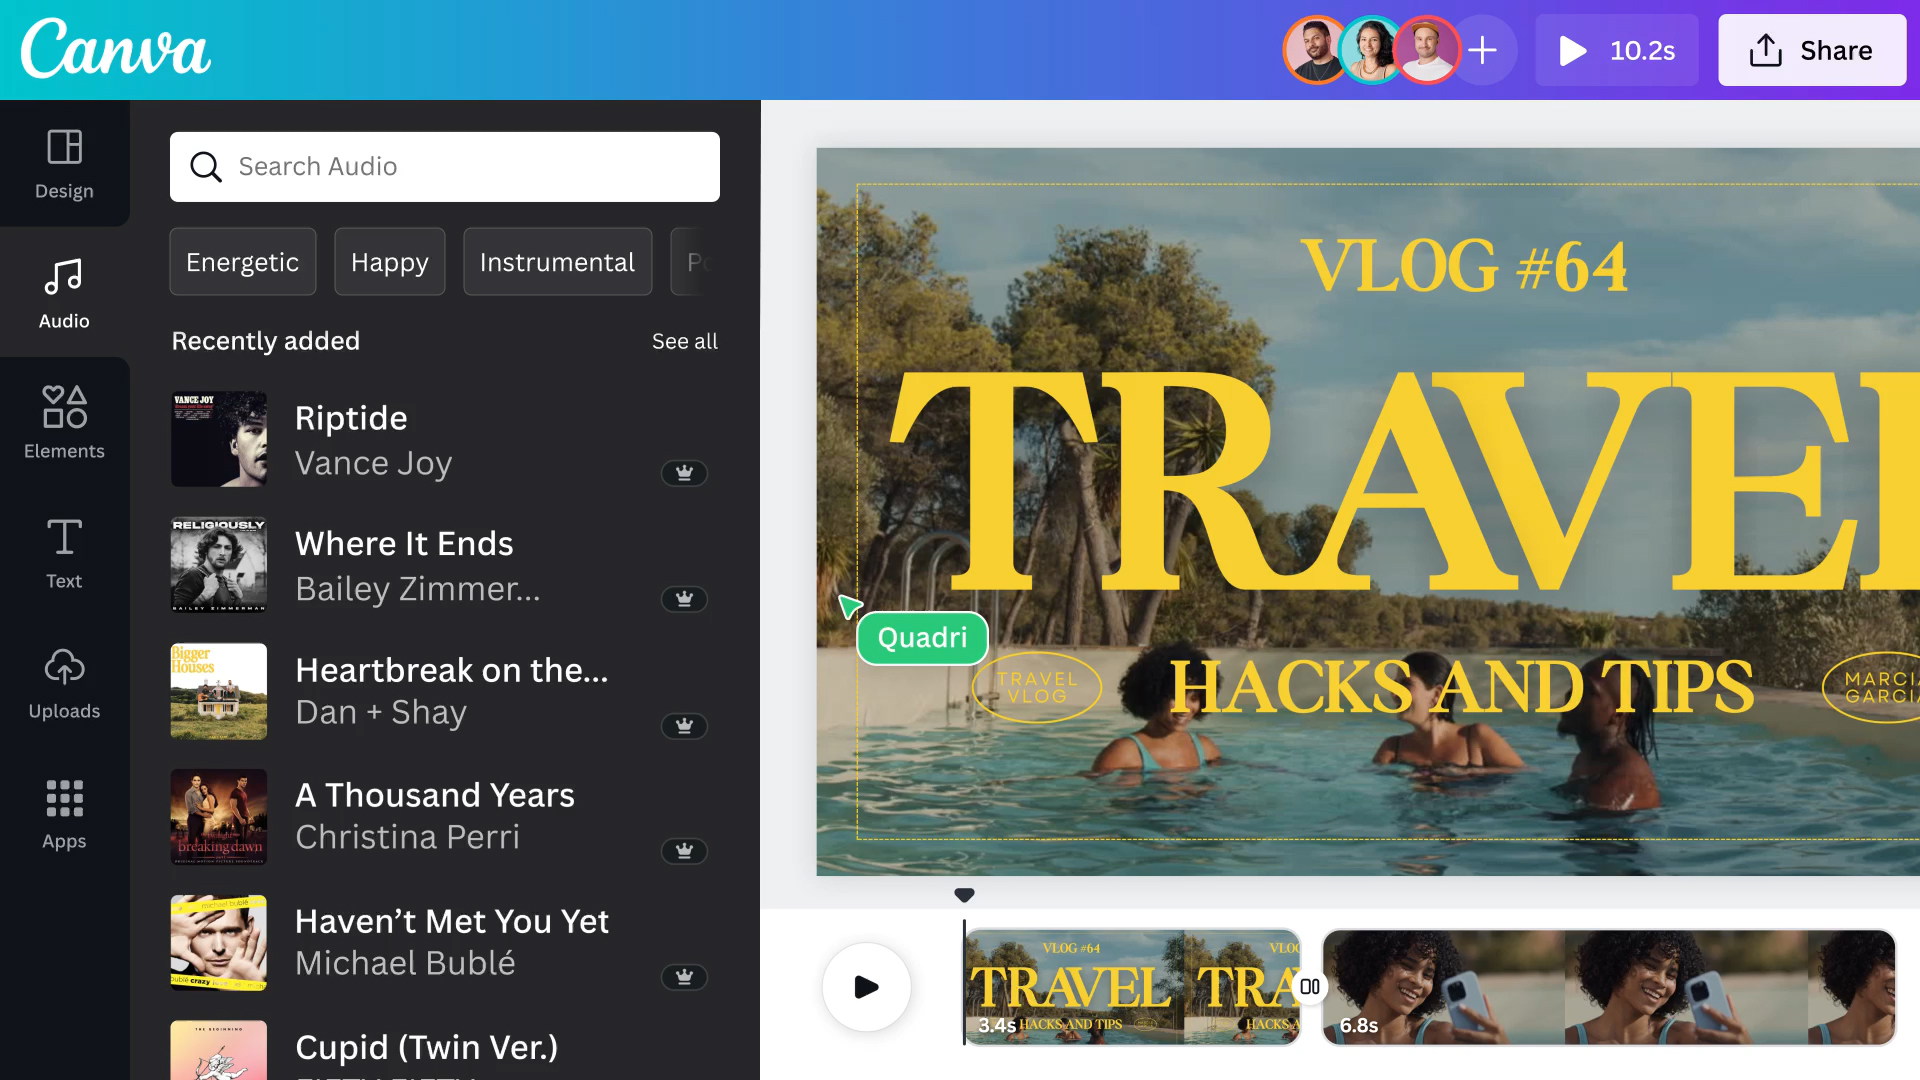 Canva customers can now create music-filled designs and bring to life what’s in their mind's eye. For example, DIY designers can showcase their musical tastes and personality by adding songs to travel vlogs, wedding videos or holiday greetings.